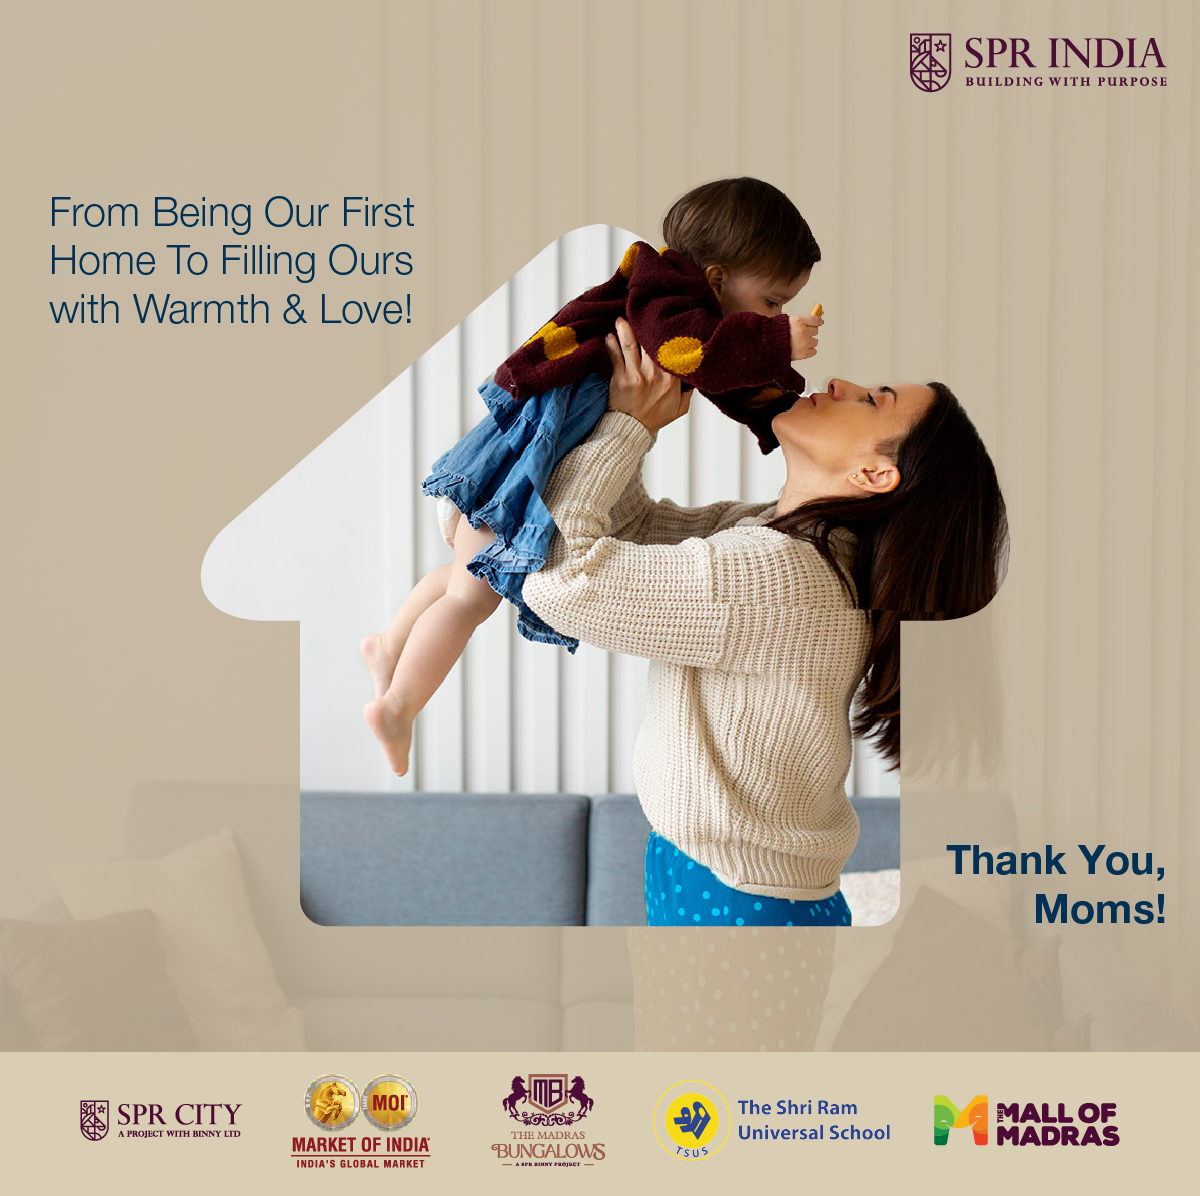 Just like the homes we build with care, mothers lay the foundations of our lives with love and strength. Let’s celebrate the remarkable women who shape our world. Happy Mother’s Day from SPR India!

#MothersDay #SPRIndia #SPRCity #MarketOfIndia #MOI